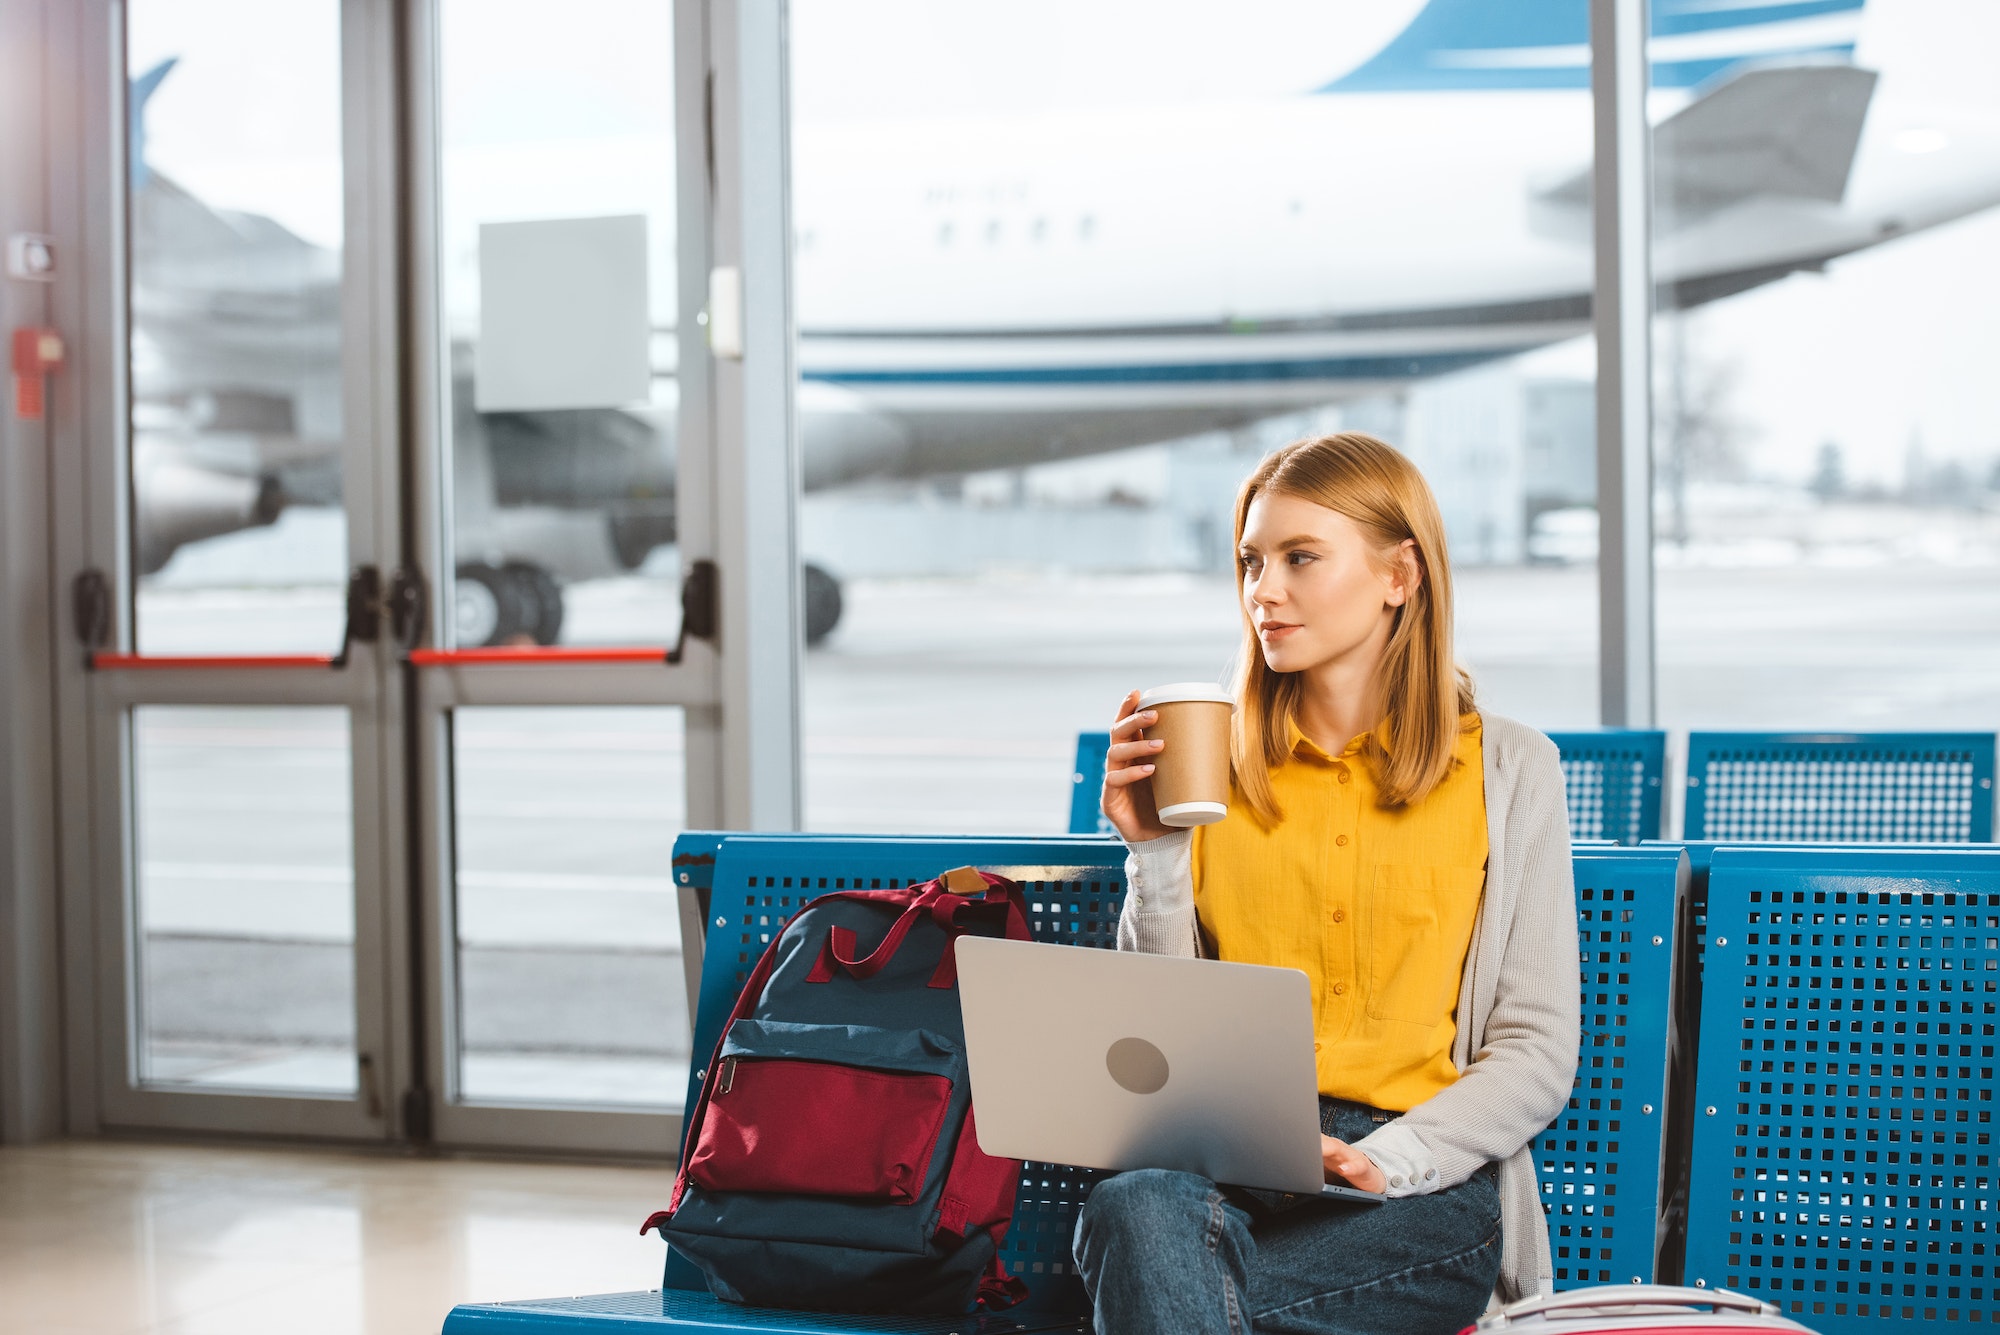 beautiful woman sitting with laptop and holding disposable cup in hand in airport